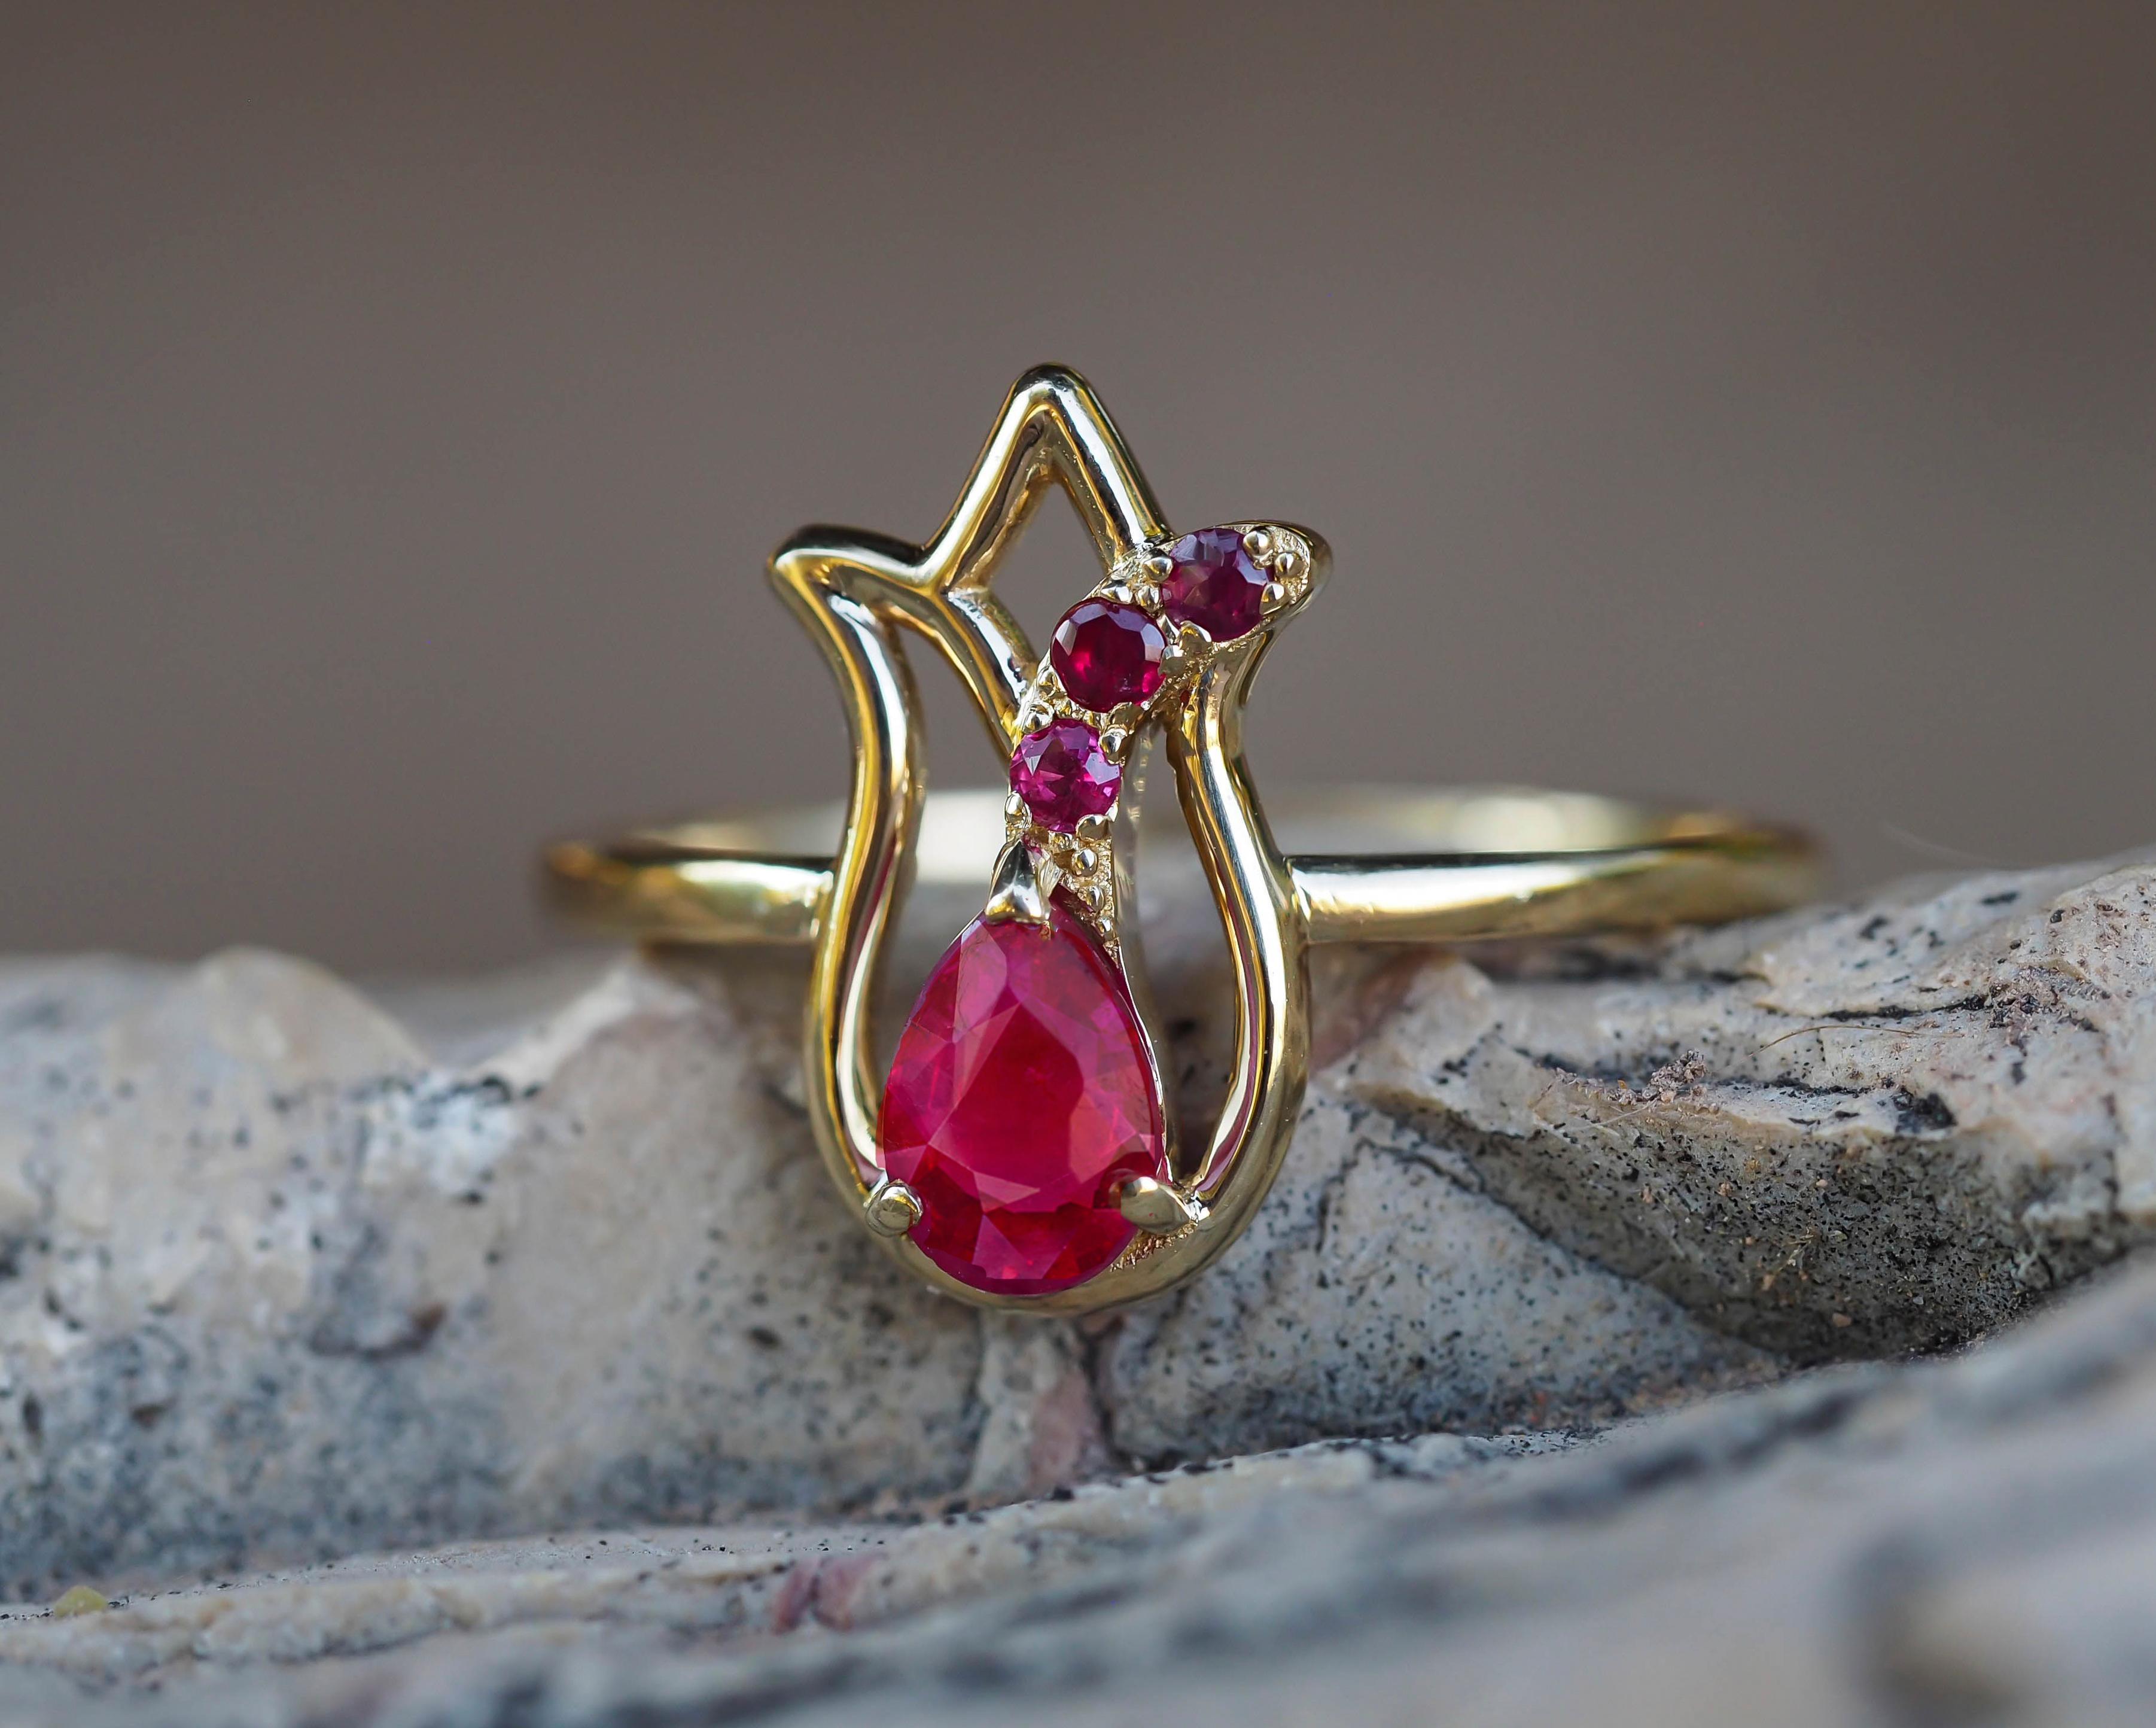 For Sale:  14 Karat Gold Ring with Ruby and Side Rubies. Gold Tulip Flower Ring ! 10